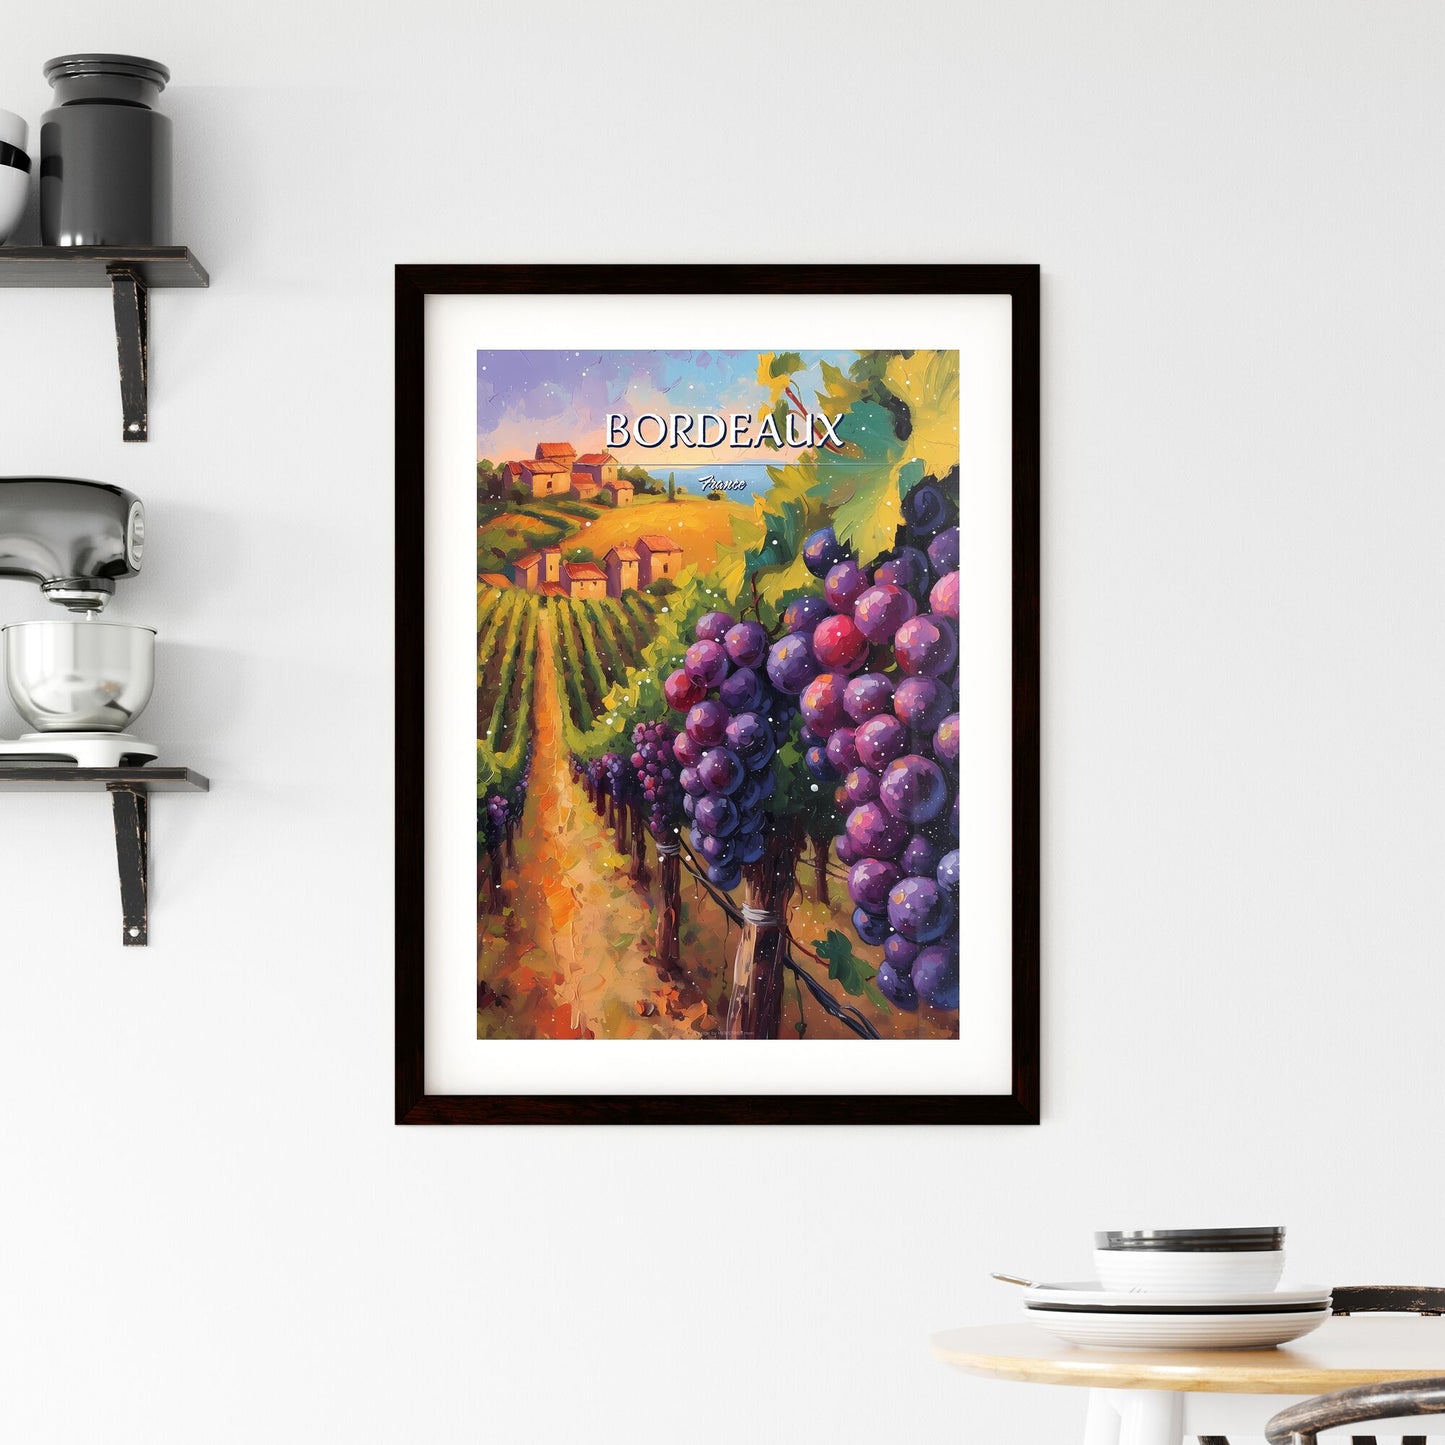 Bordeaux, France, Renowned for its red blends - Art print of a painting of a vineyard Default Title